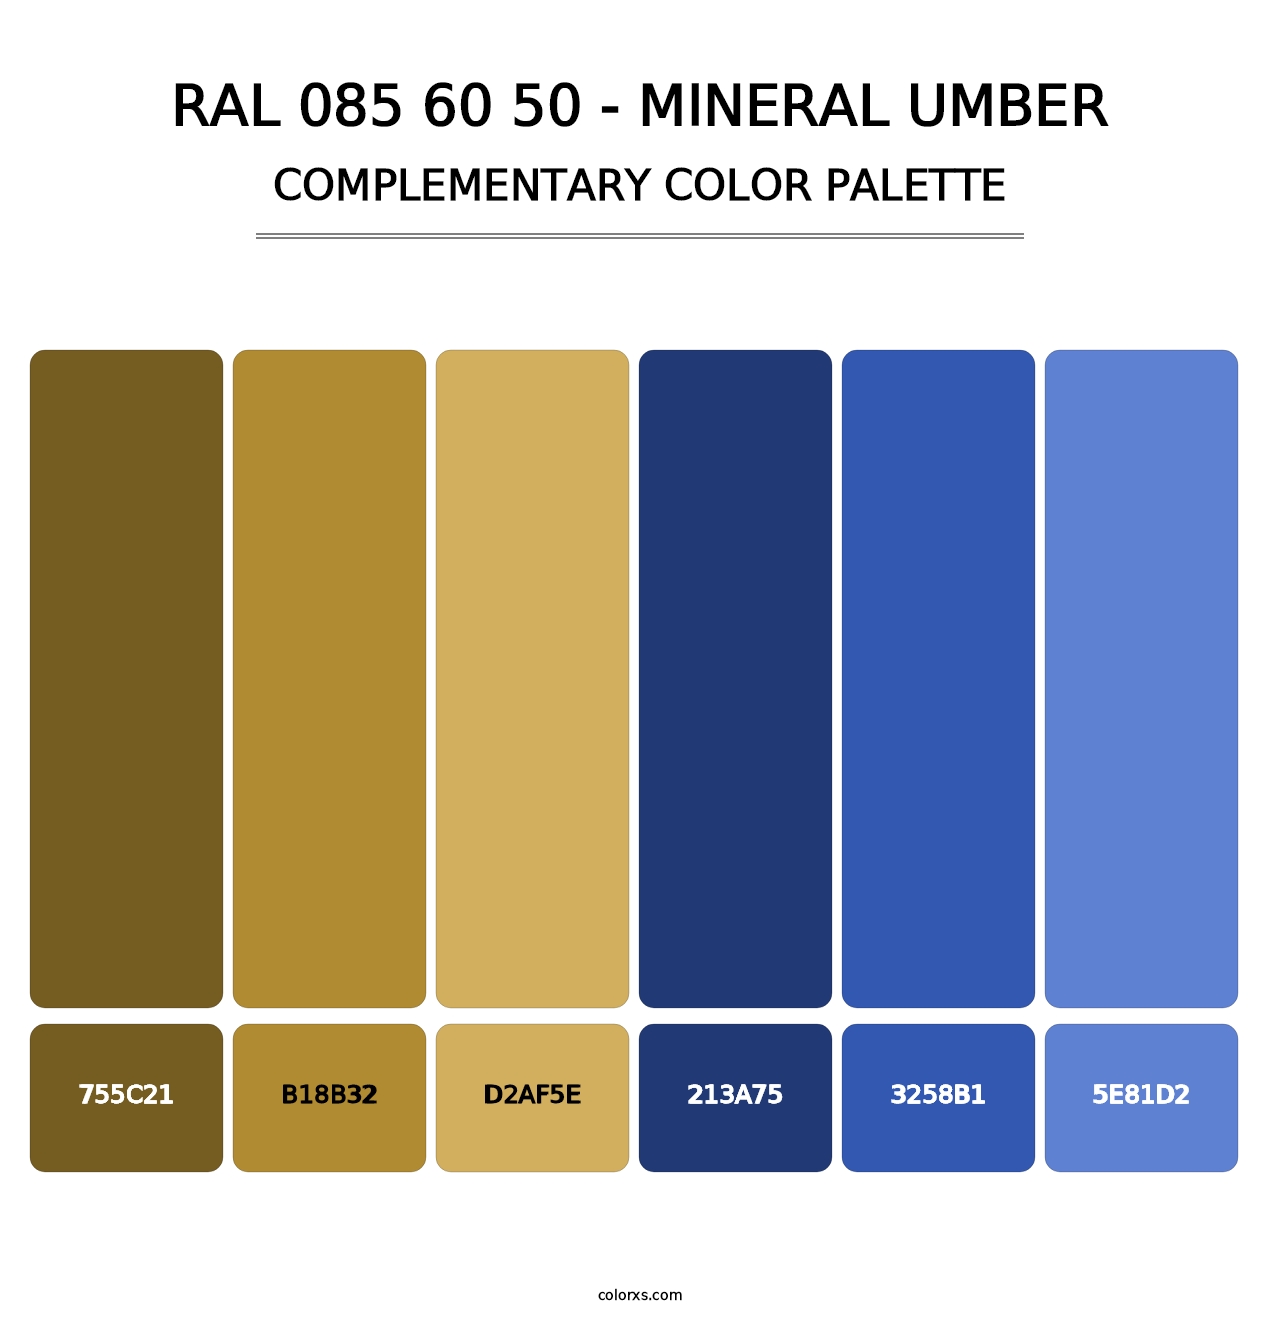 RAL 085 60 50 - Mineral Umber - Complementary Color Palette